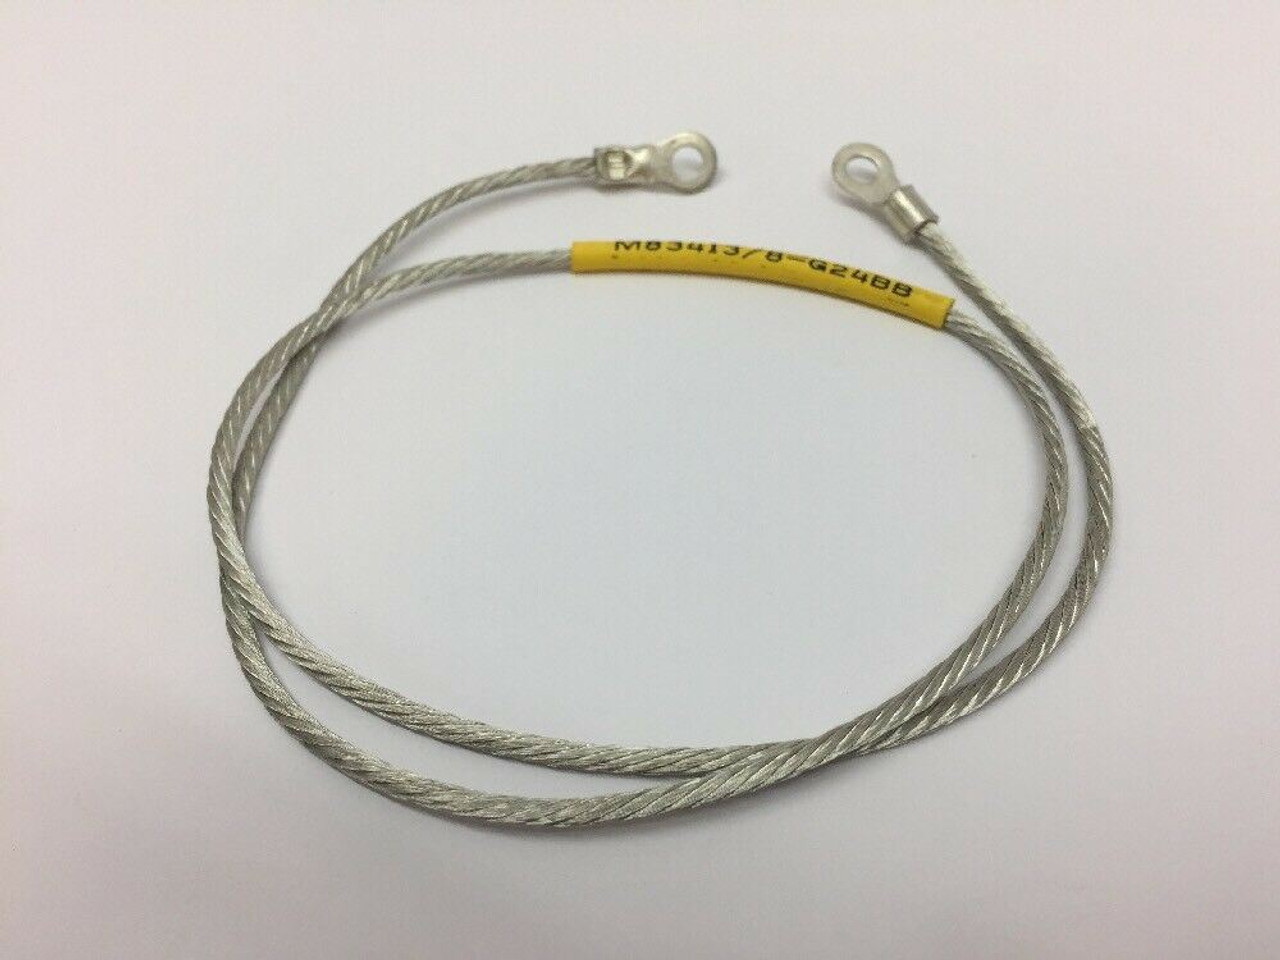 2 ft. Electrical Lead M83413/8-G24BB